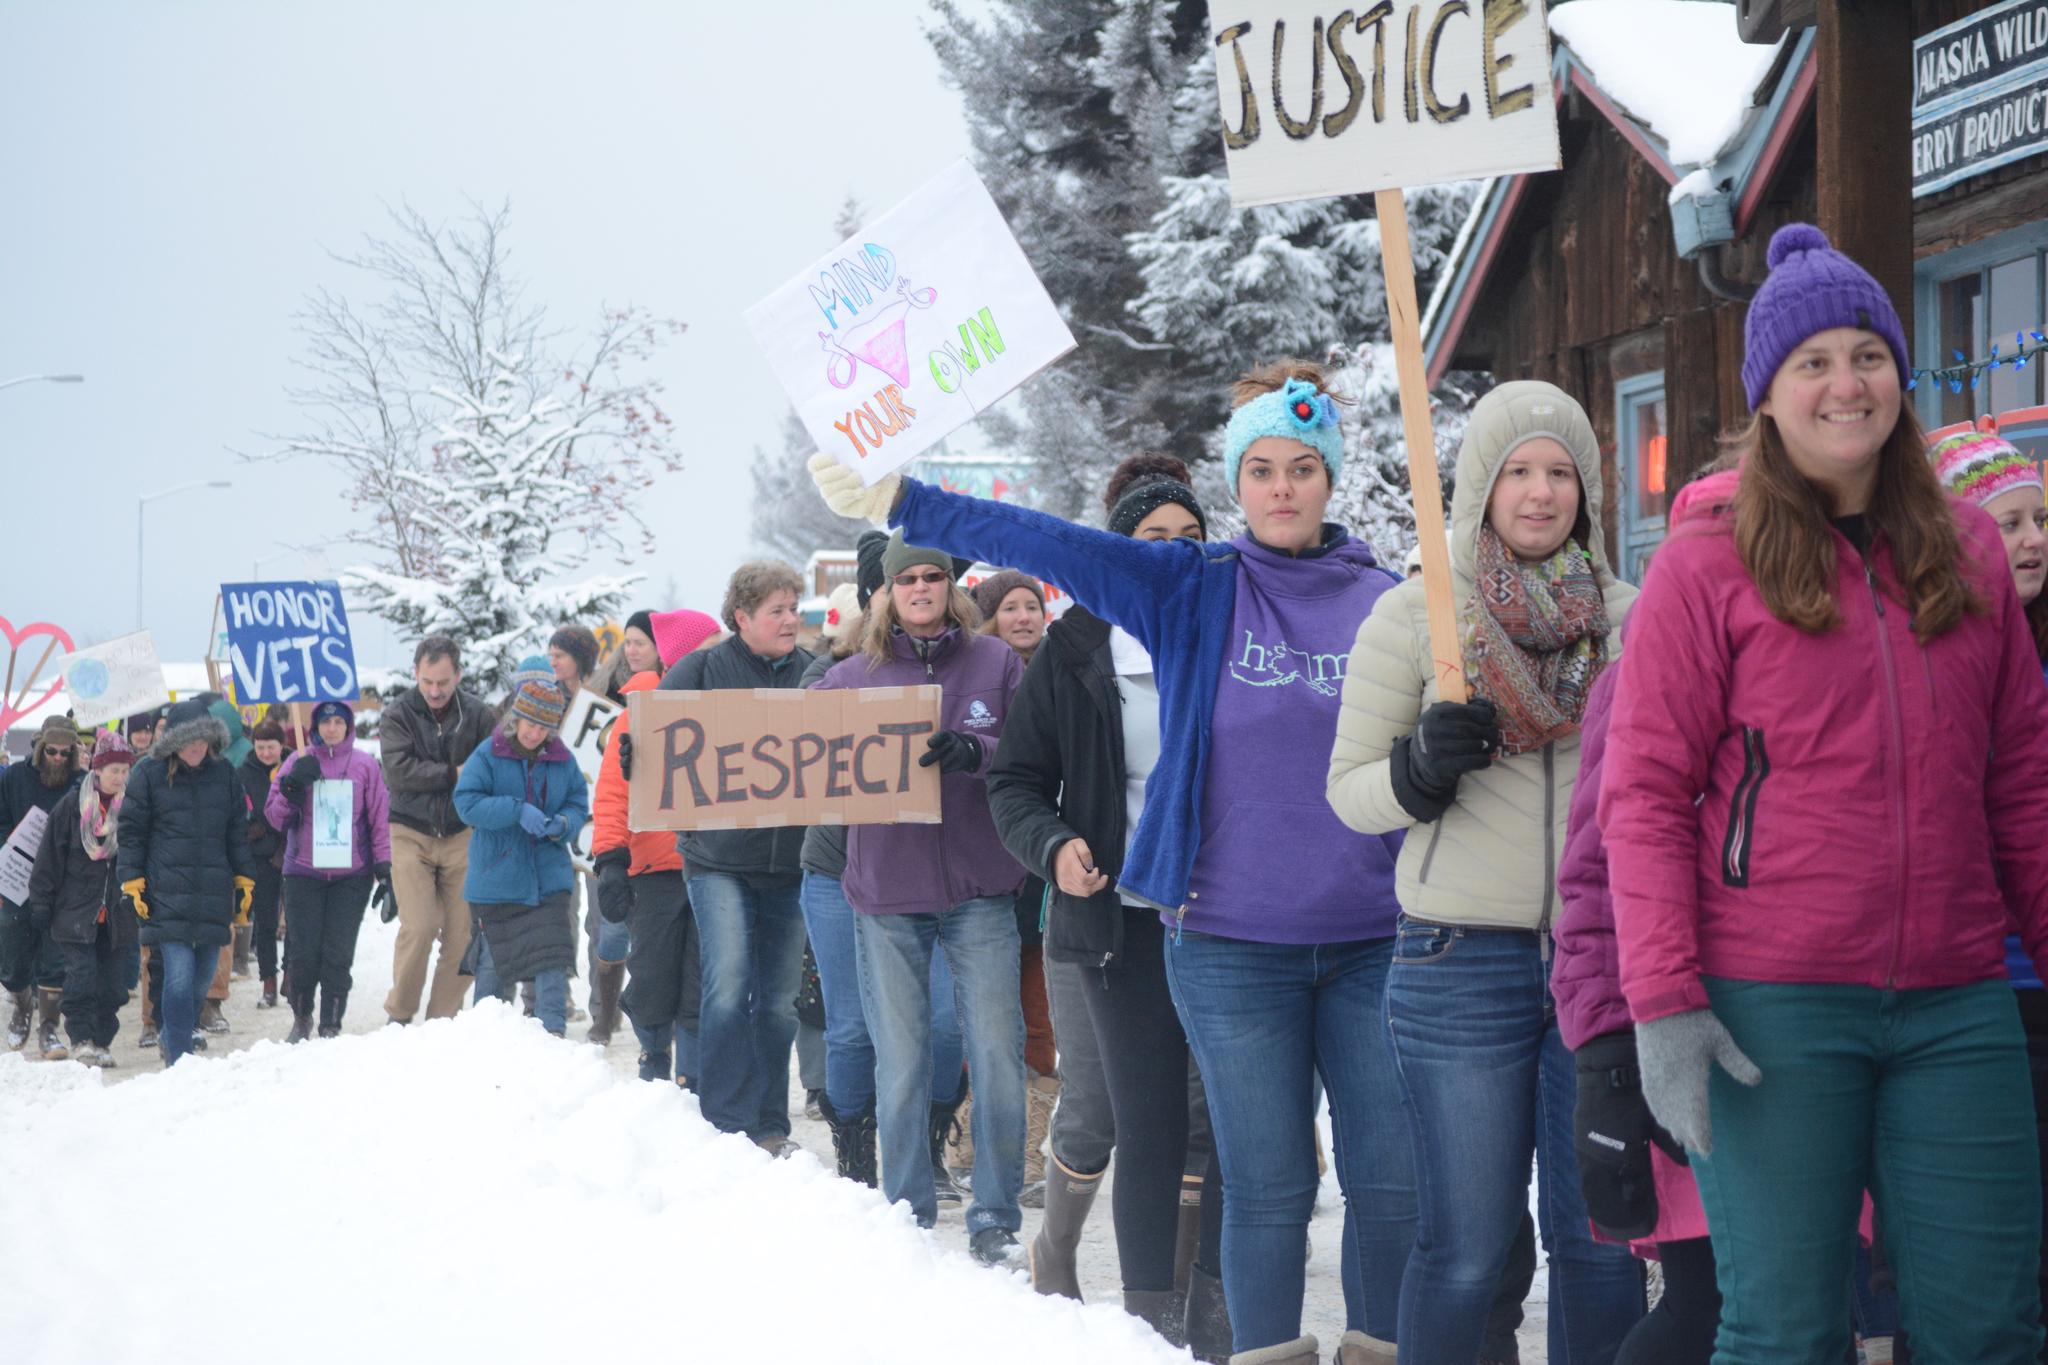 Marchers seek justice - and more